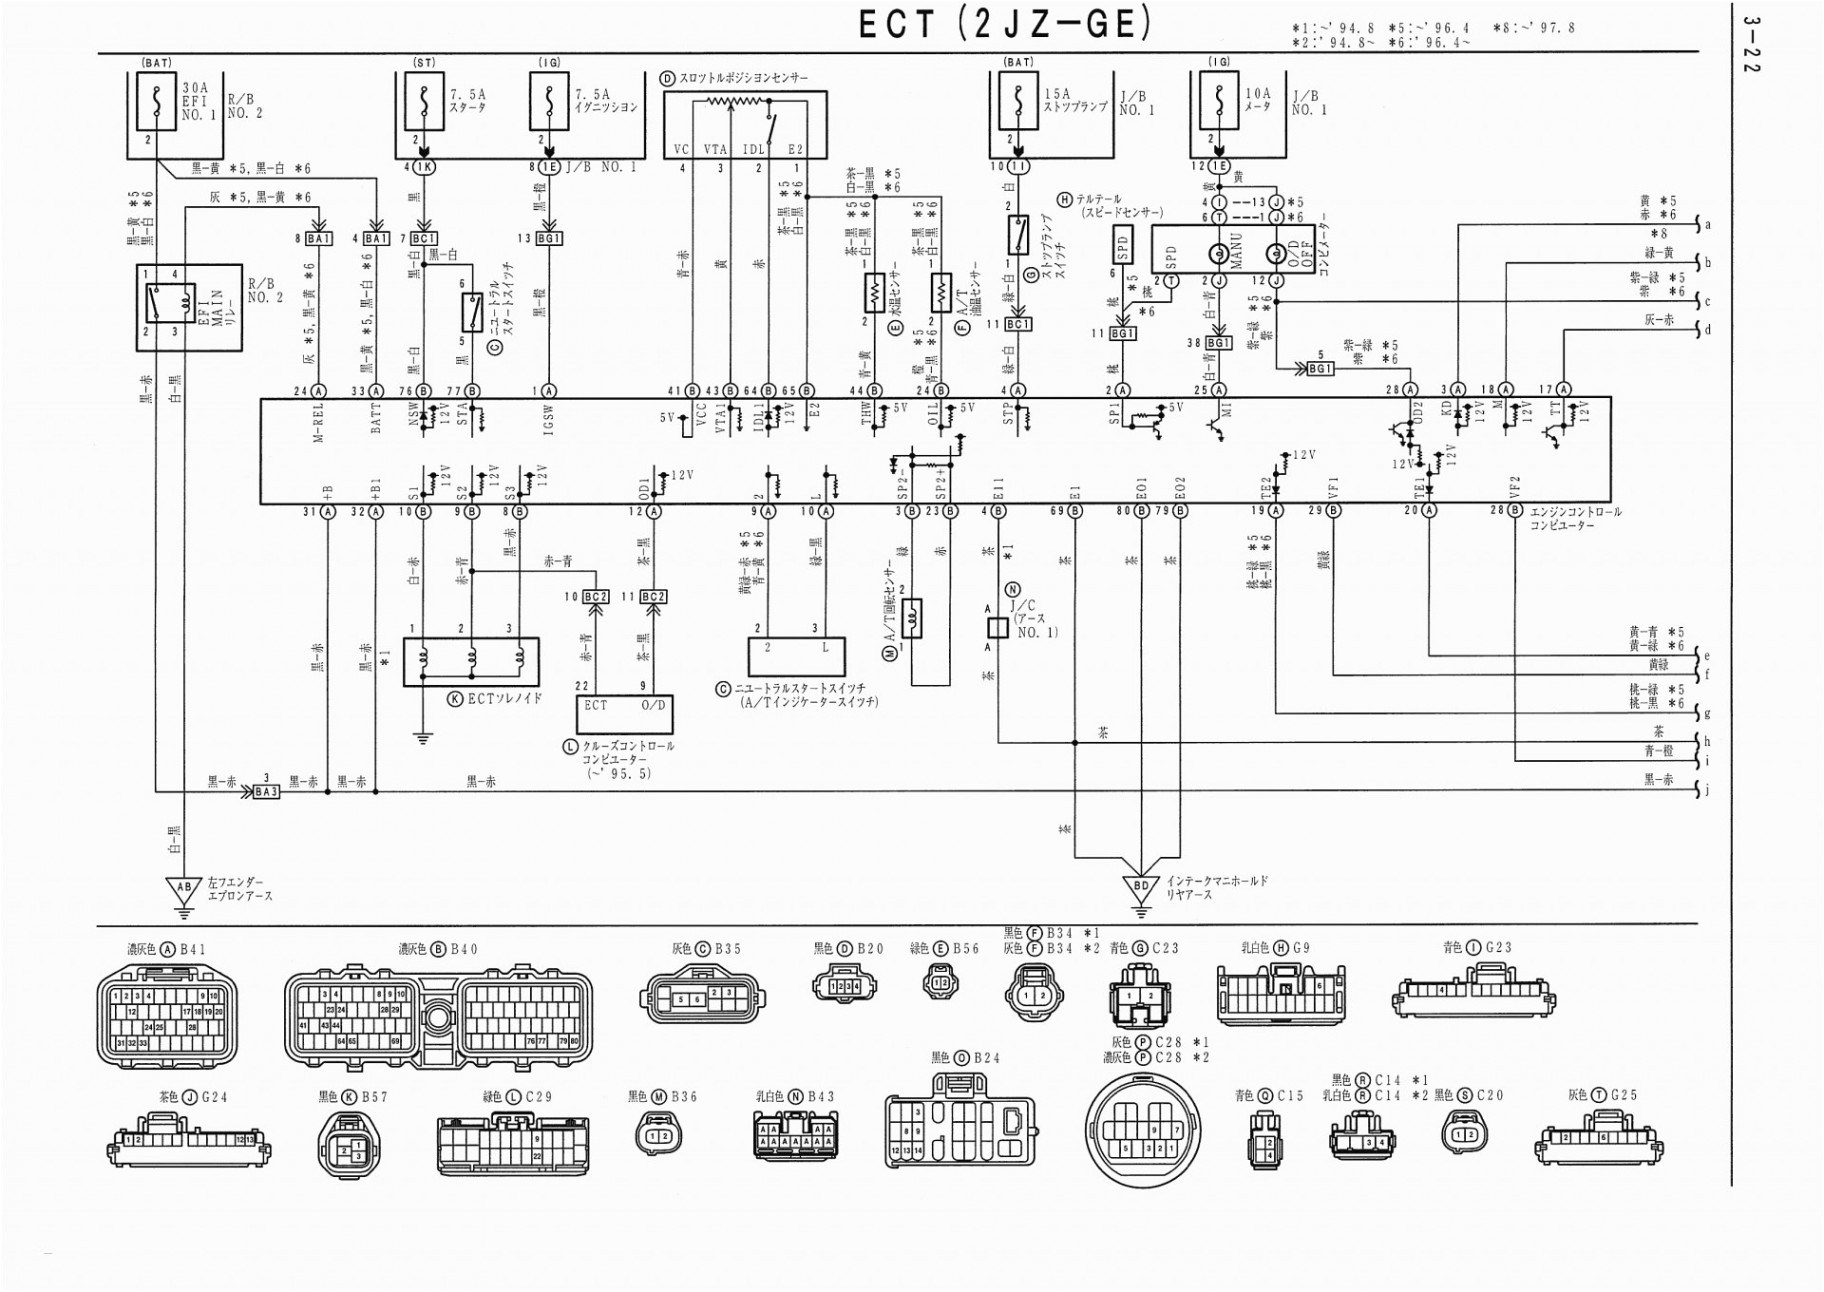 home network wiring wiring diagram databasehome network wiring layout